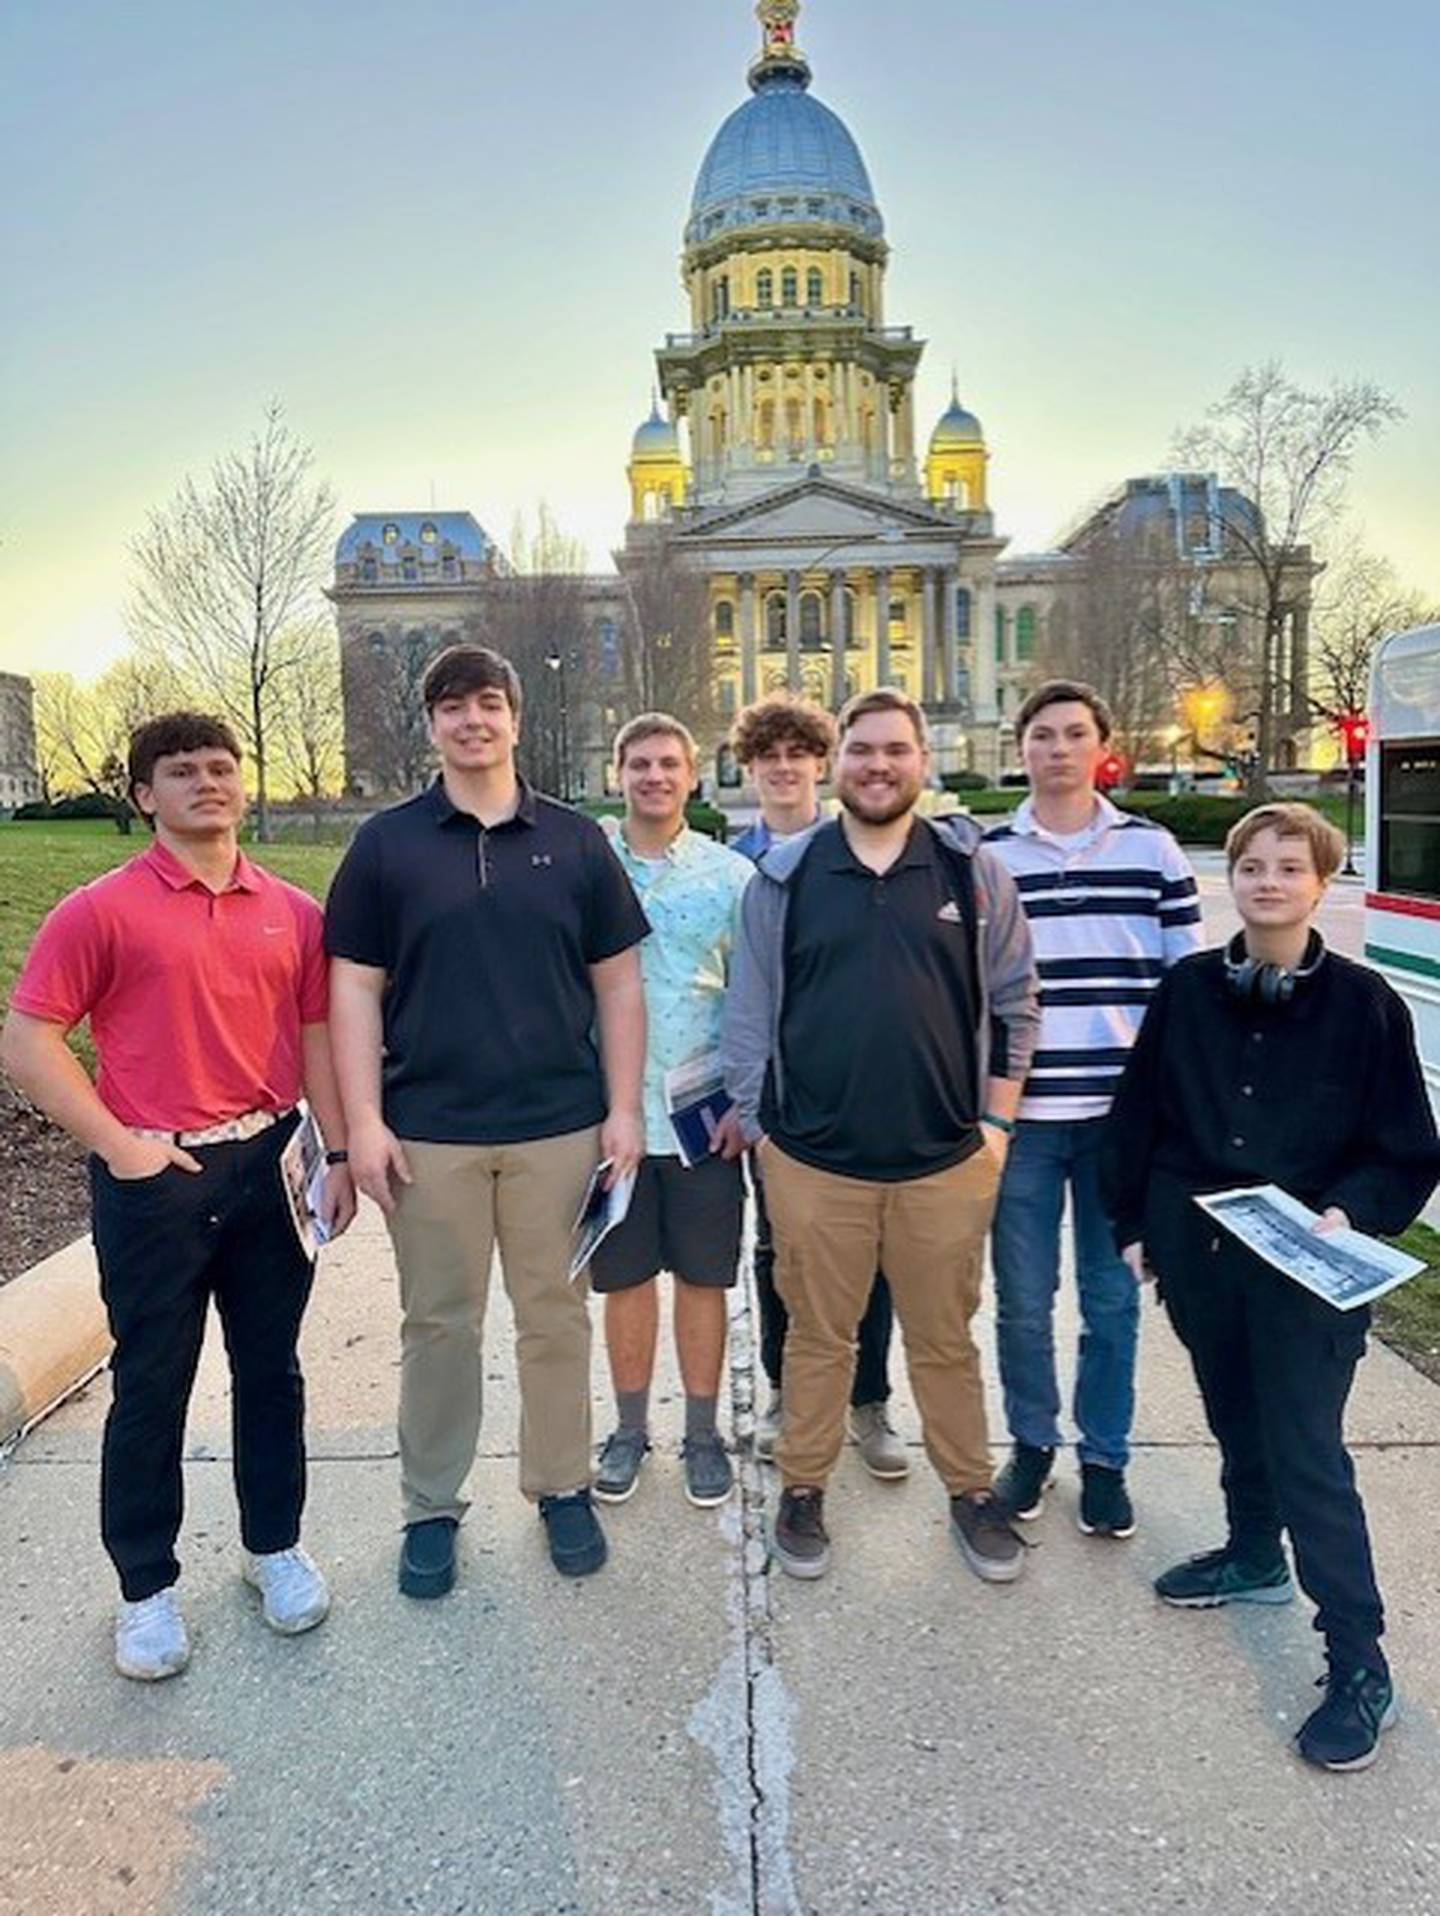 Seven students from La Salle-Peru Township High School competed in a March 16-17 mock trial in Springfield. From left are Cameron Olivero, Adam Lane, Jakob Terzick, Henry Pinter, Brock Terzick, Ryne Bubela and Alex Crooks.